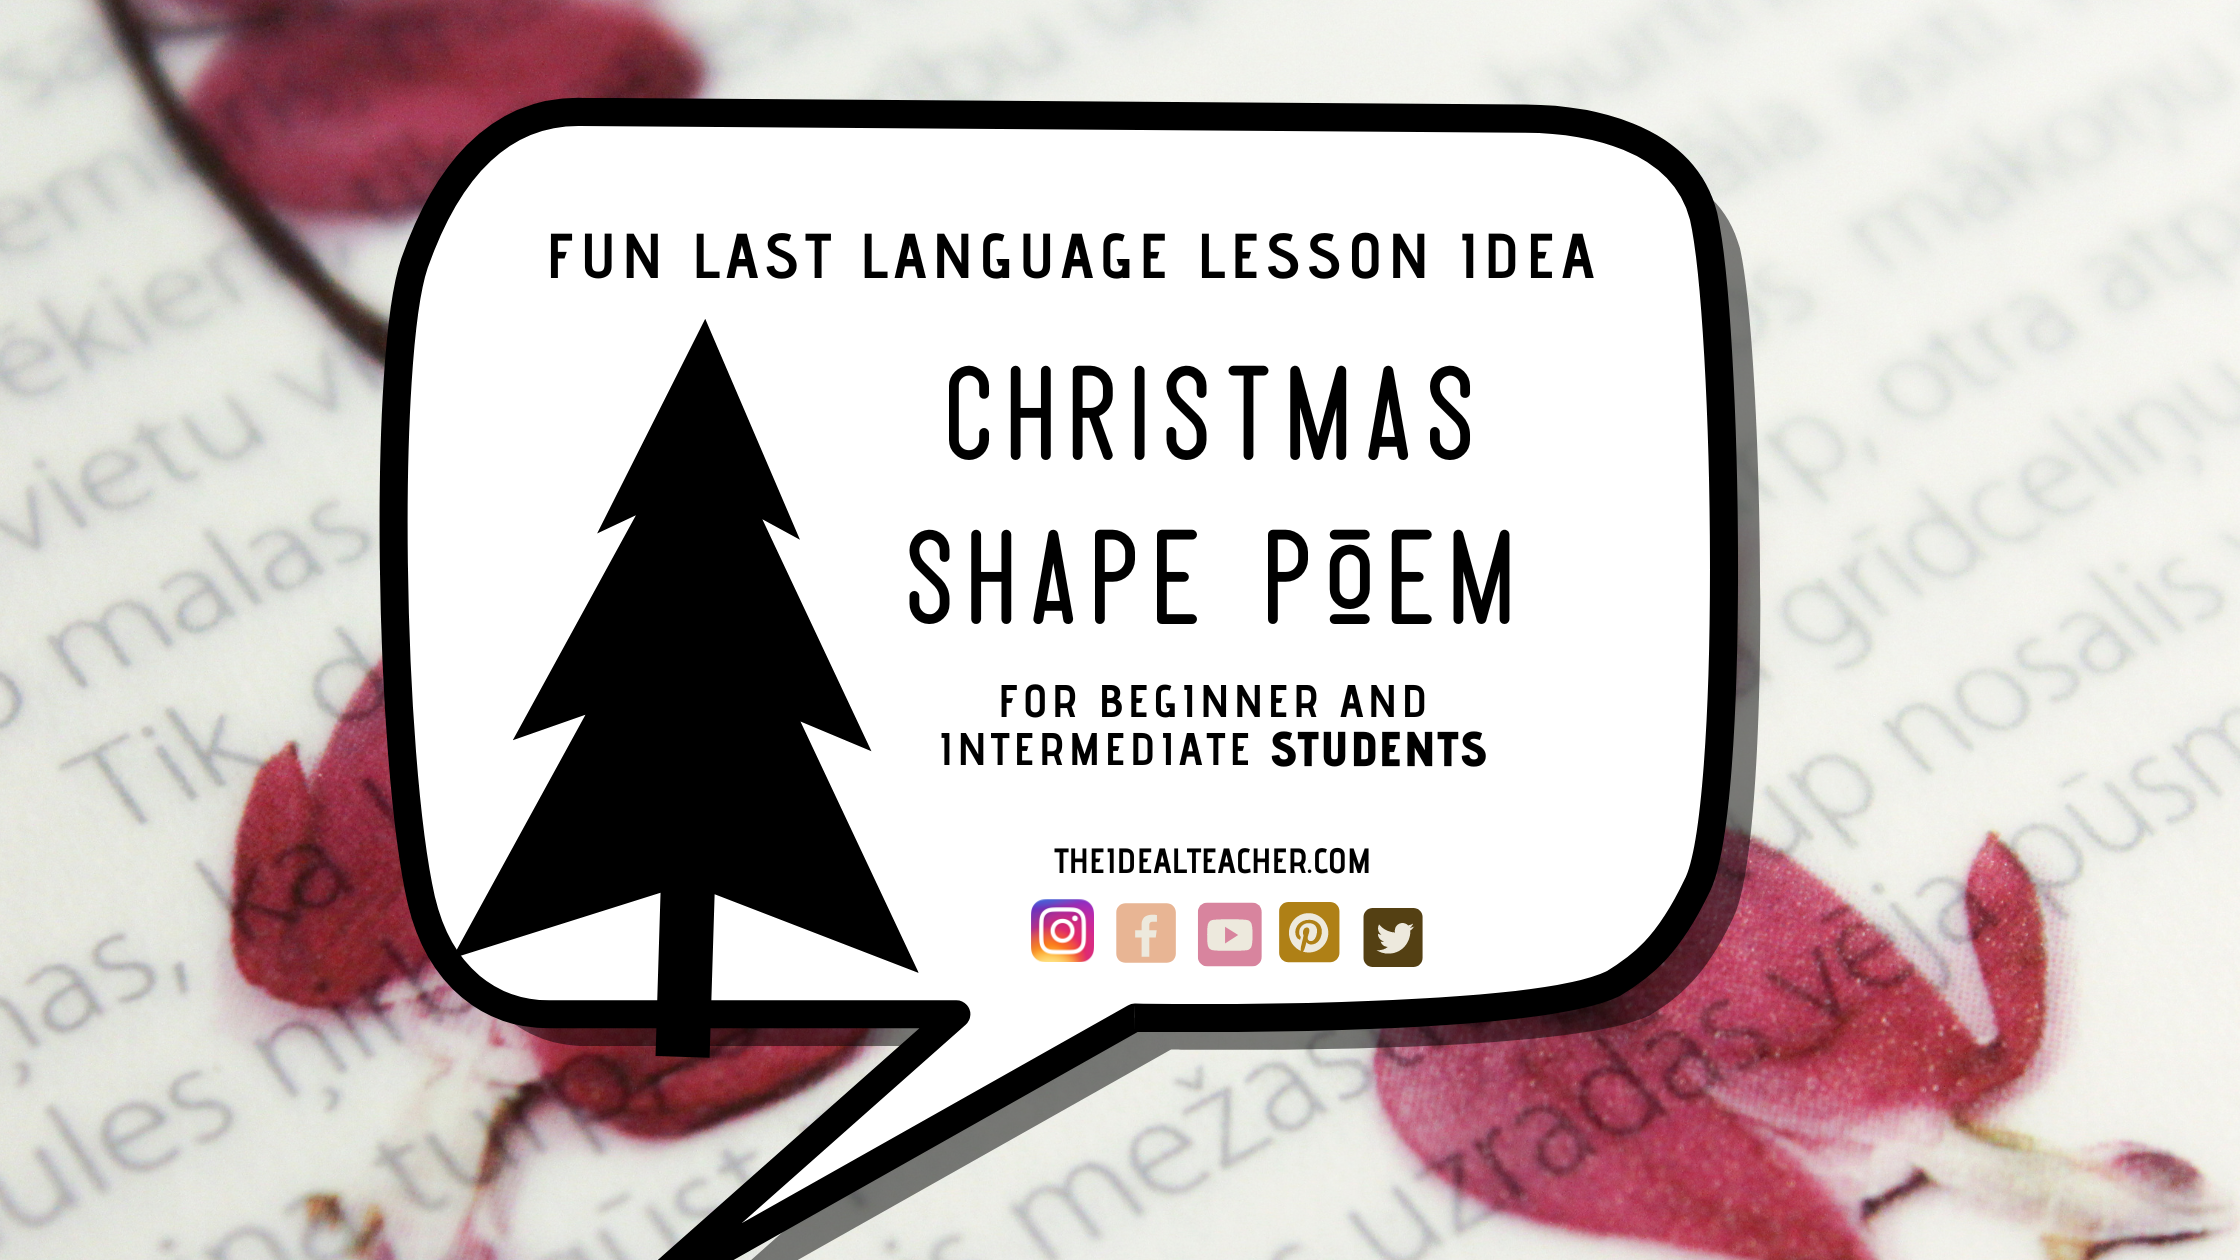 Easy Christmas Shape Poem for Your Language Lessons